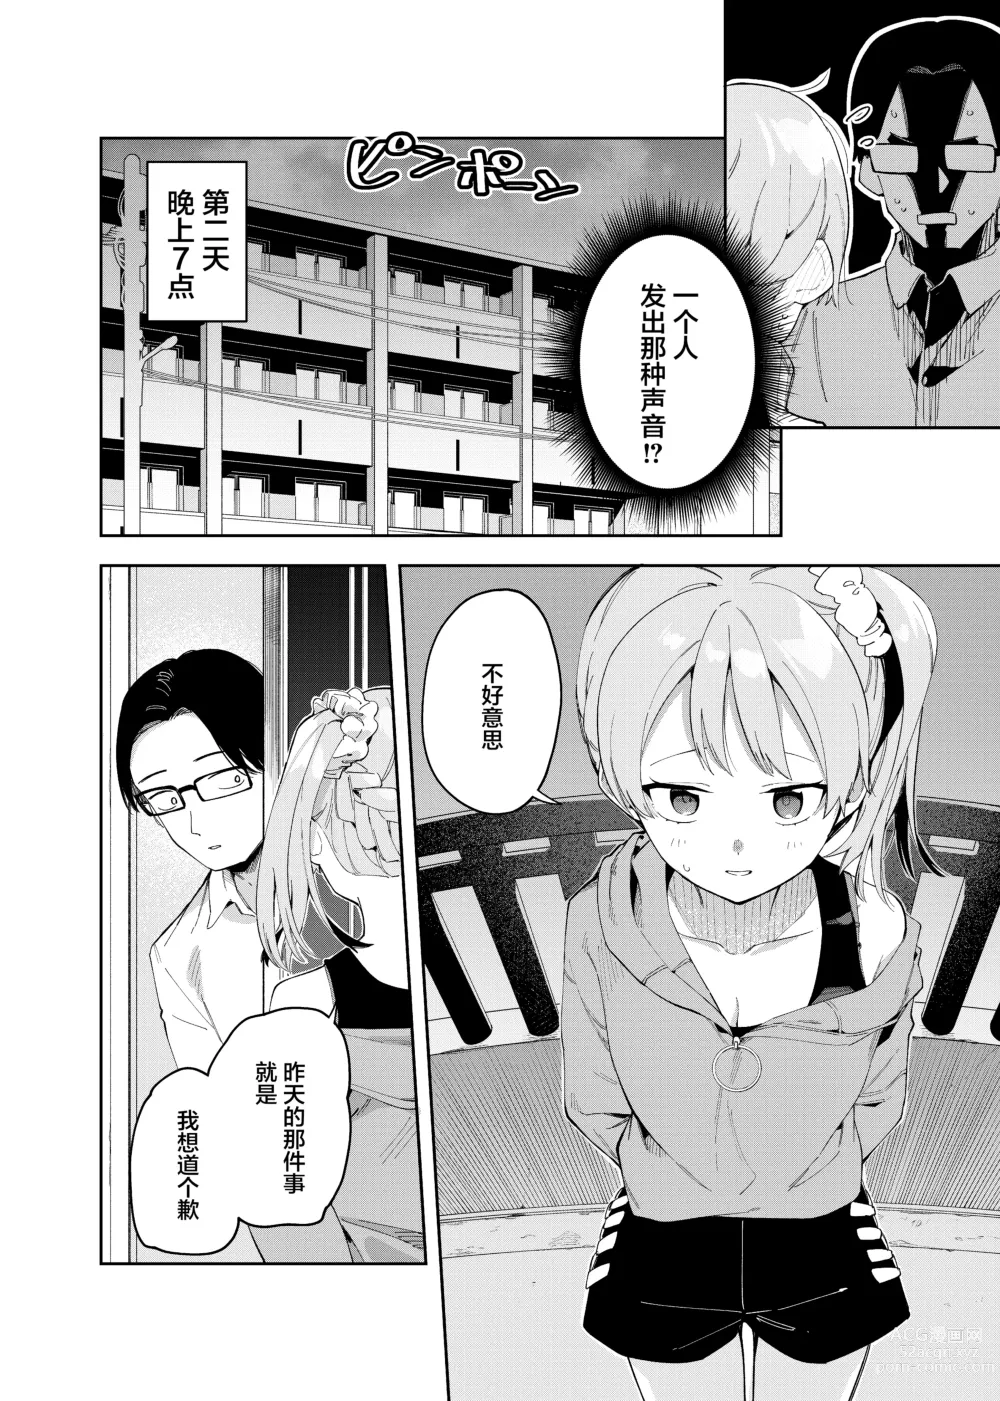 Page 7 of doujinshi 隣人は有名配信者2